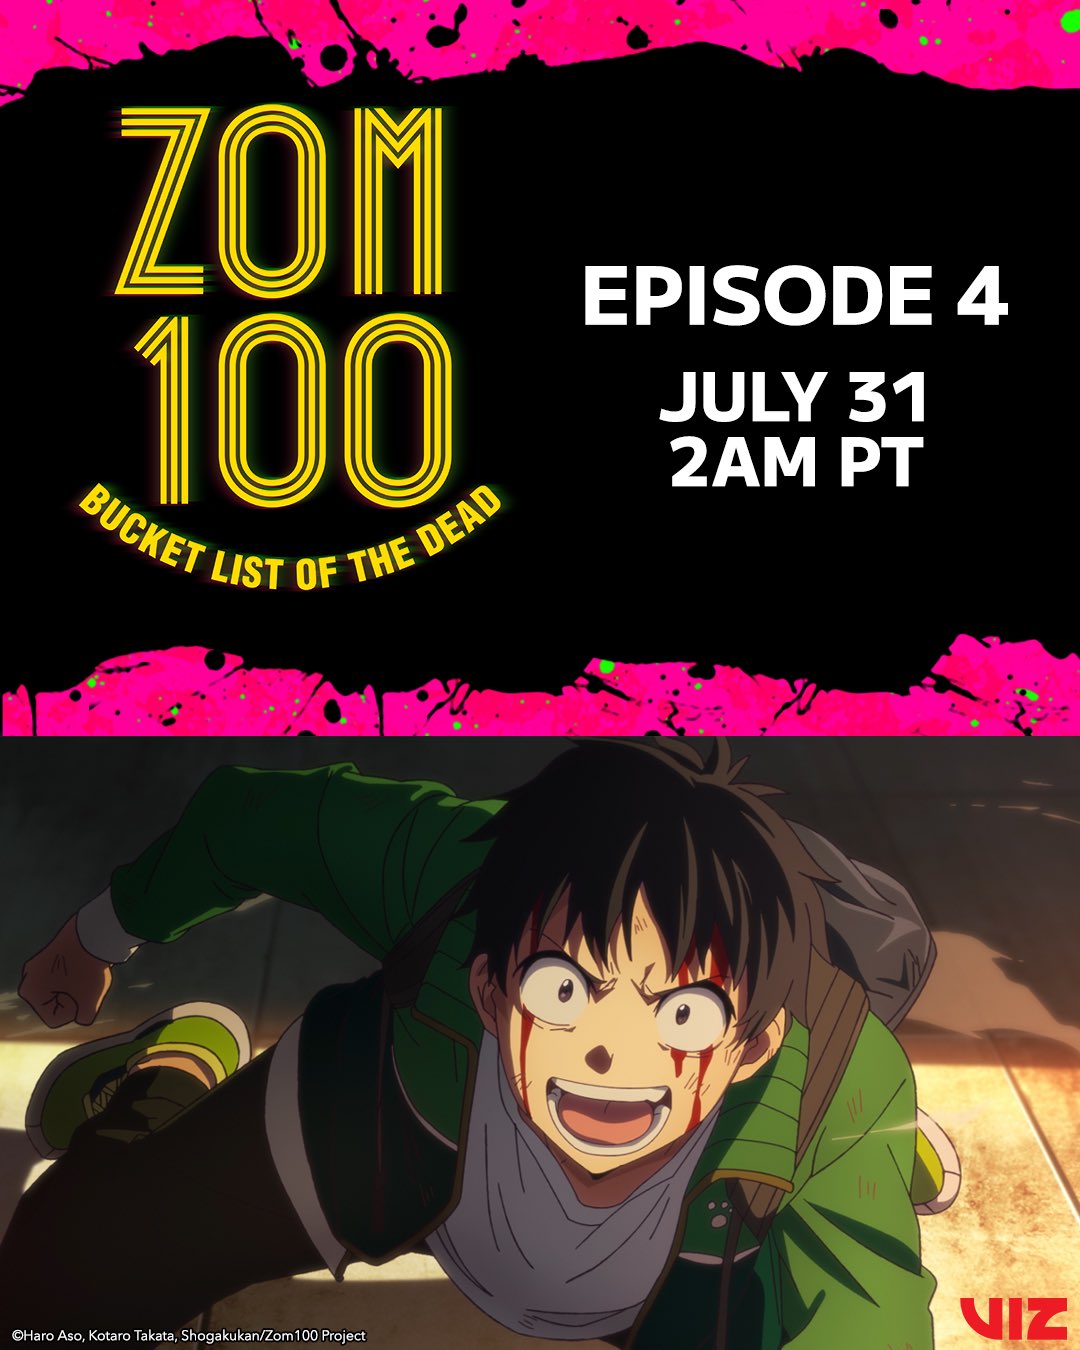 Episode 4 of Zom 100 Delayed Due to Production Difficulties